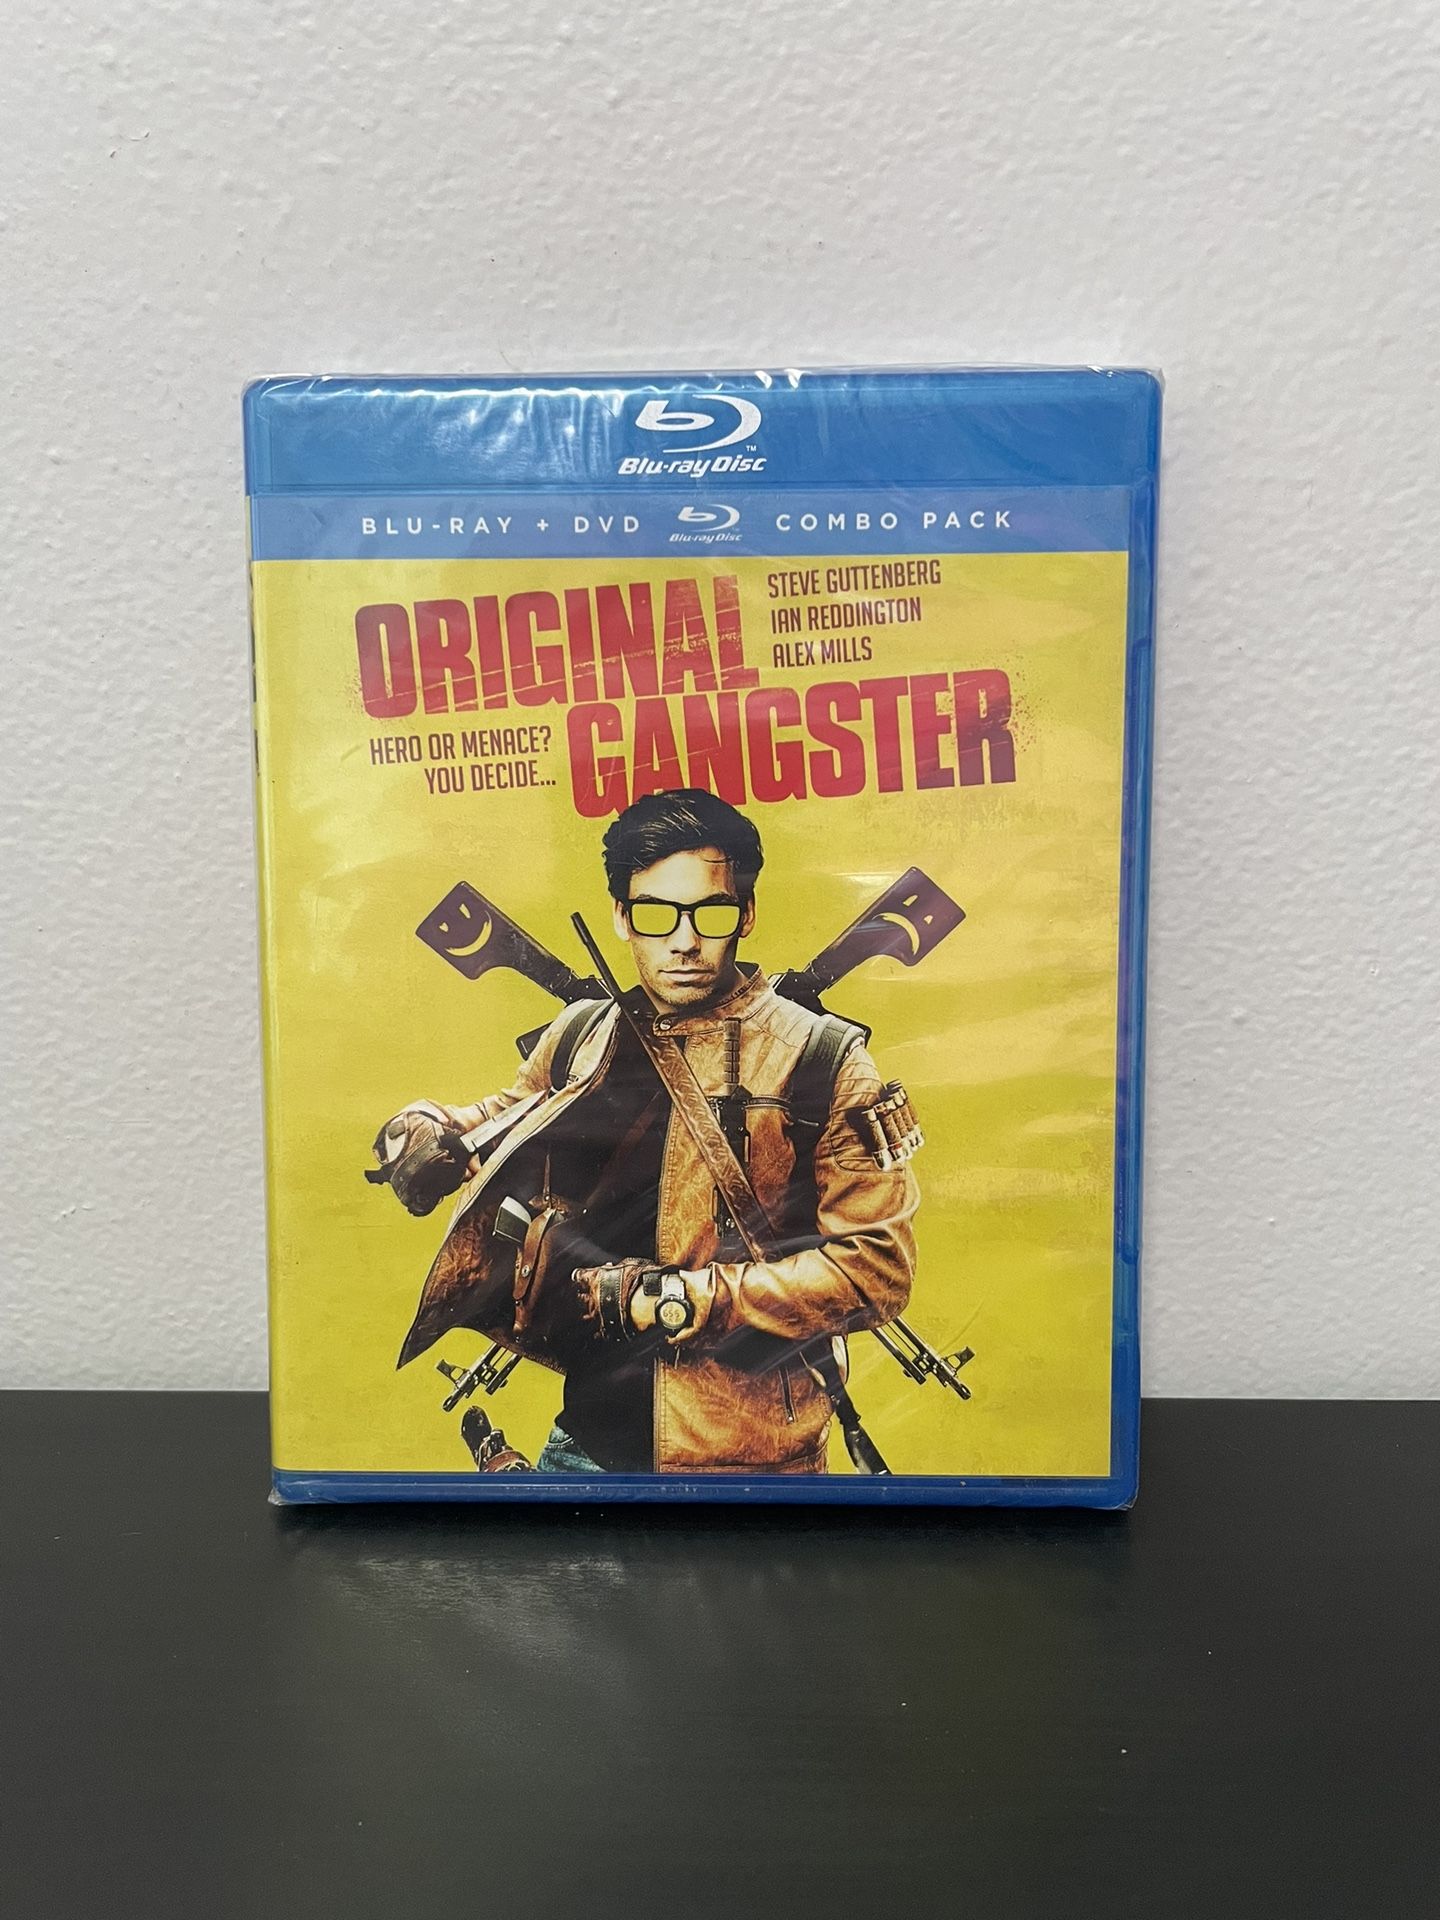 Original Gangster Blu-Ray + DVD Combo NEW SEALED Action Crime Drama Movie 2020